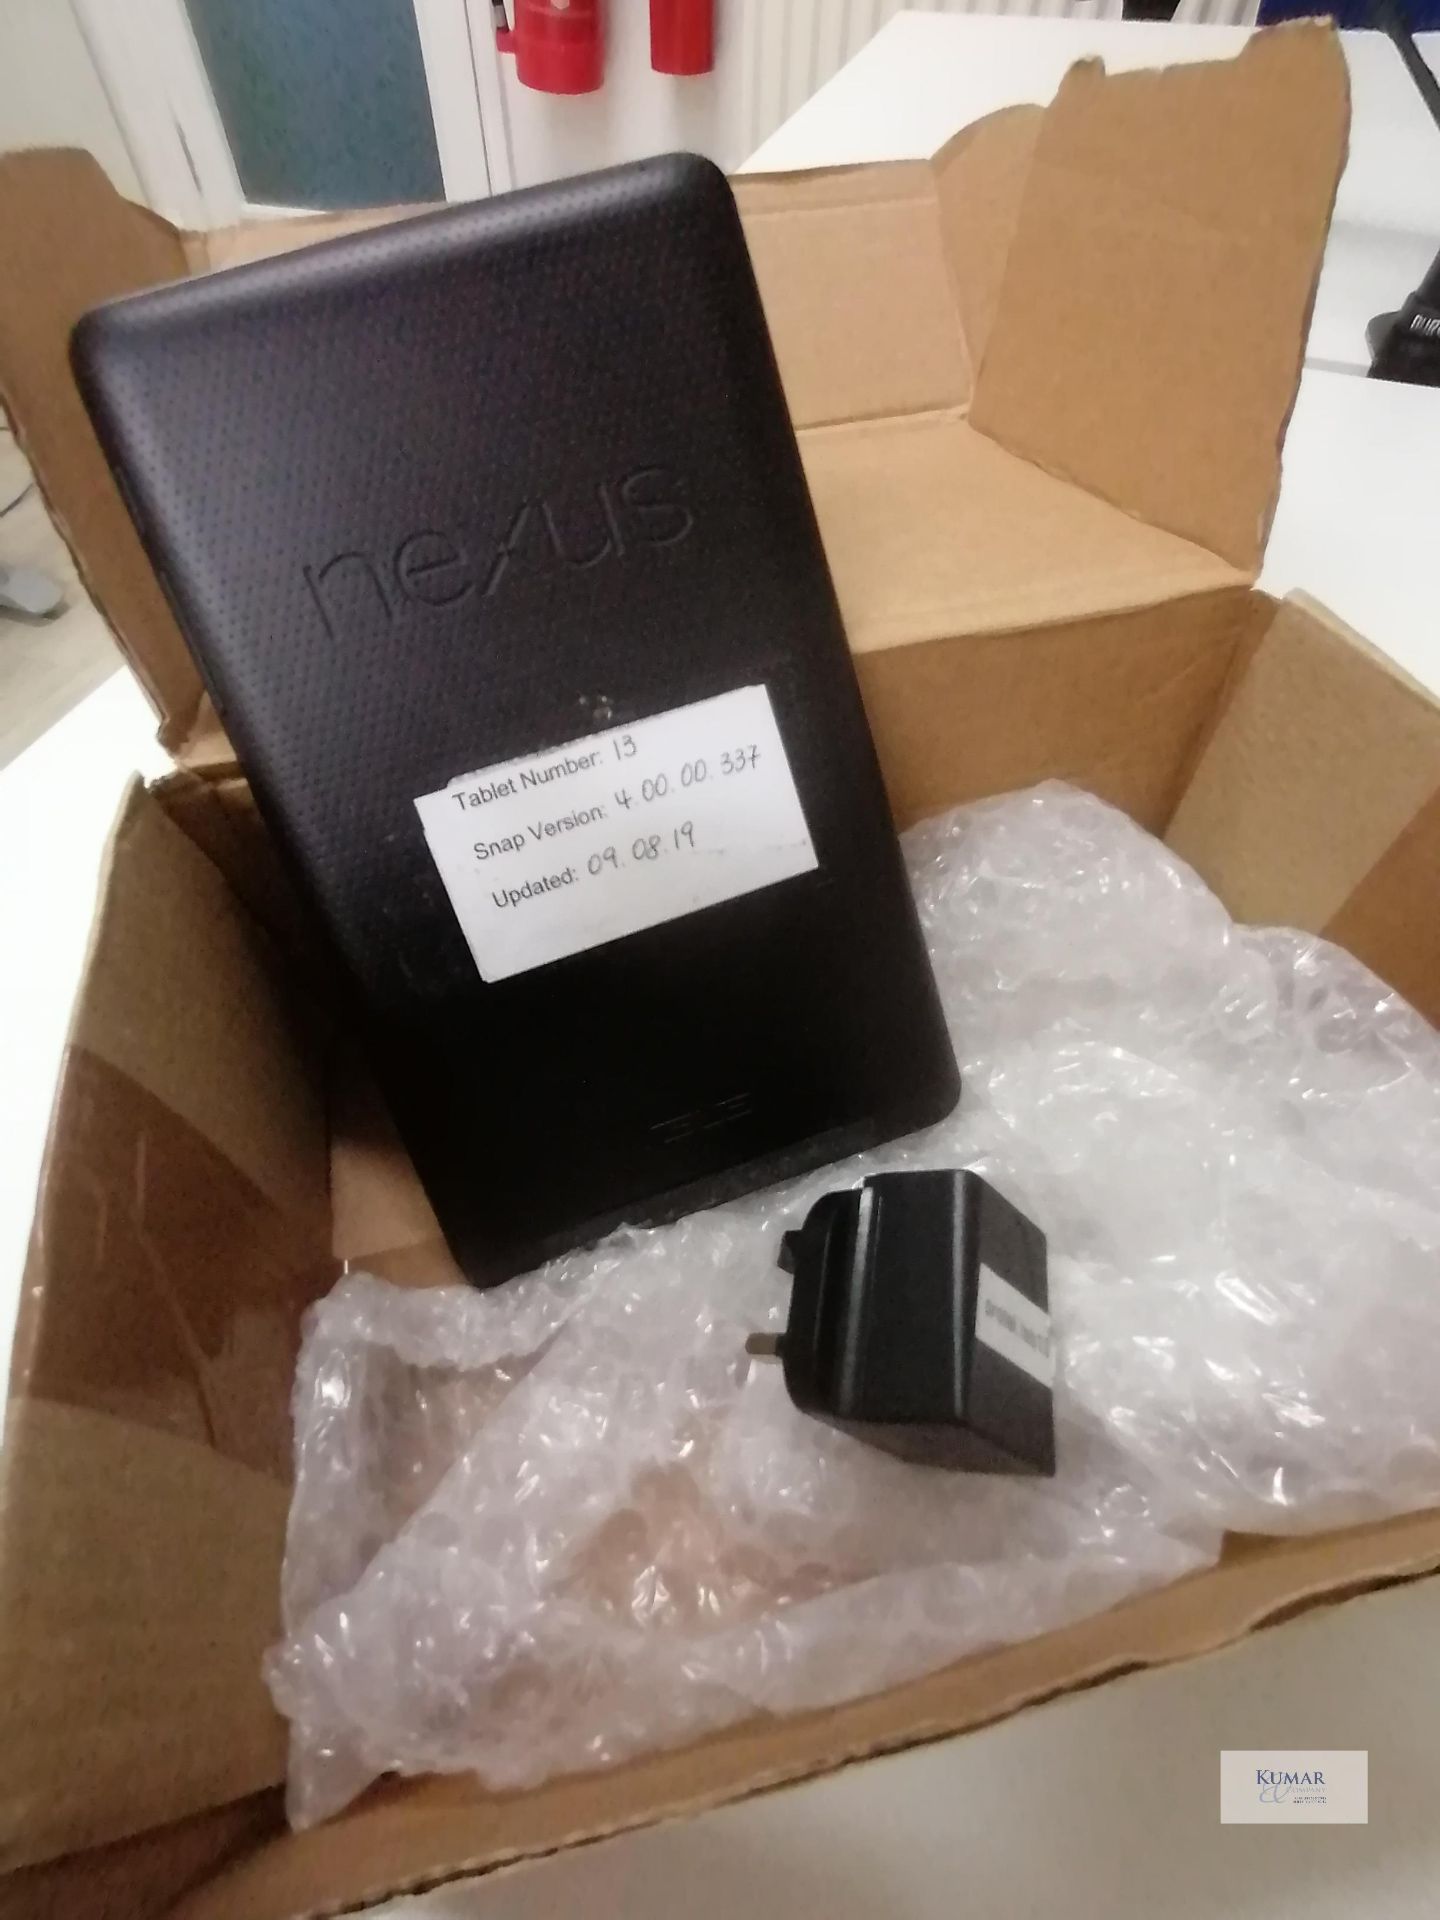 Nexus 7" Tablet Updated 09 08 2018 Cable and charger Serial No D10KBC5556688 - Image 2 of 3